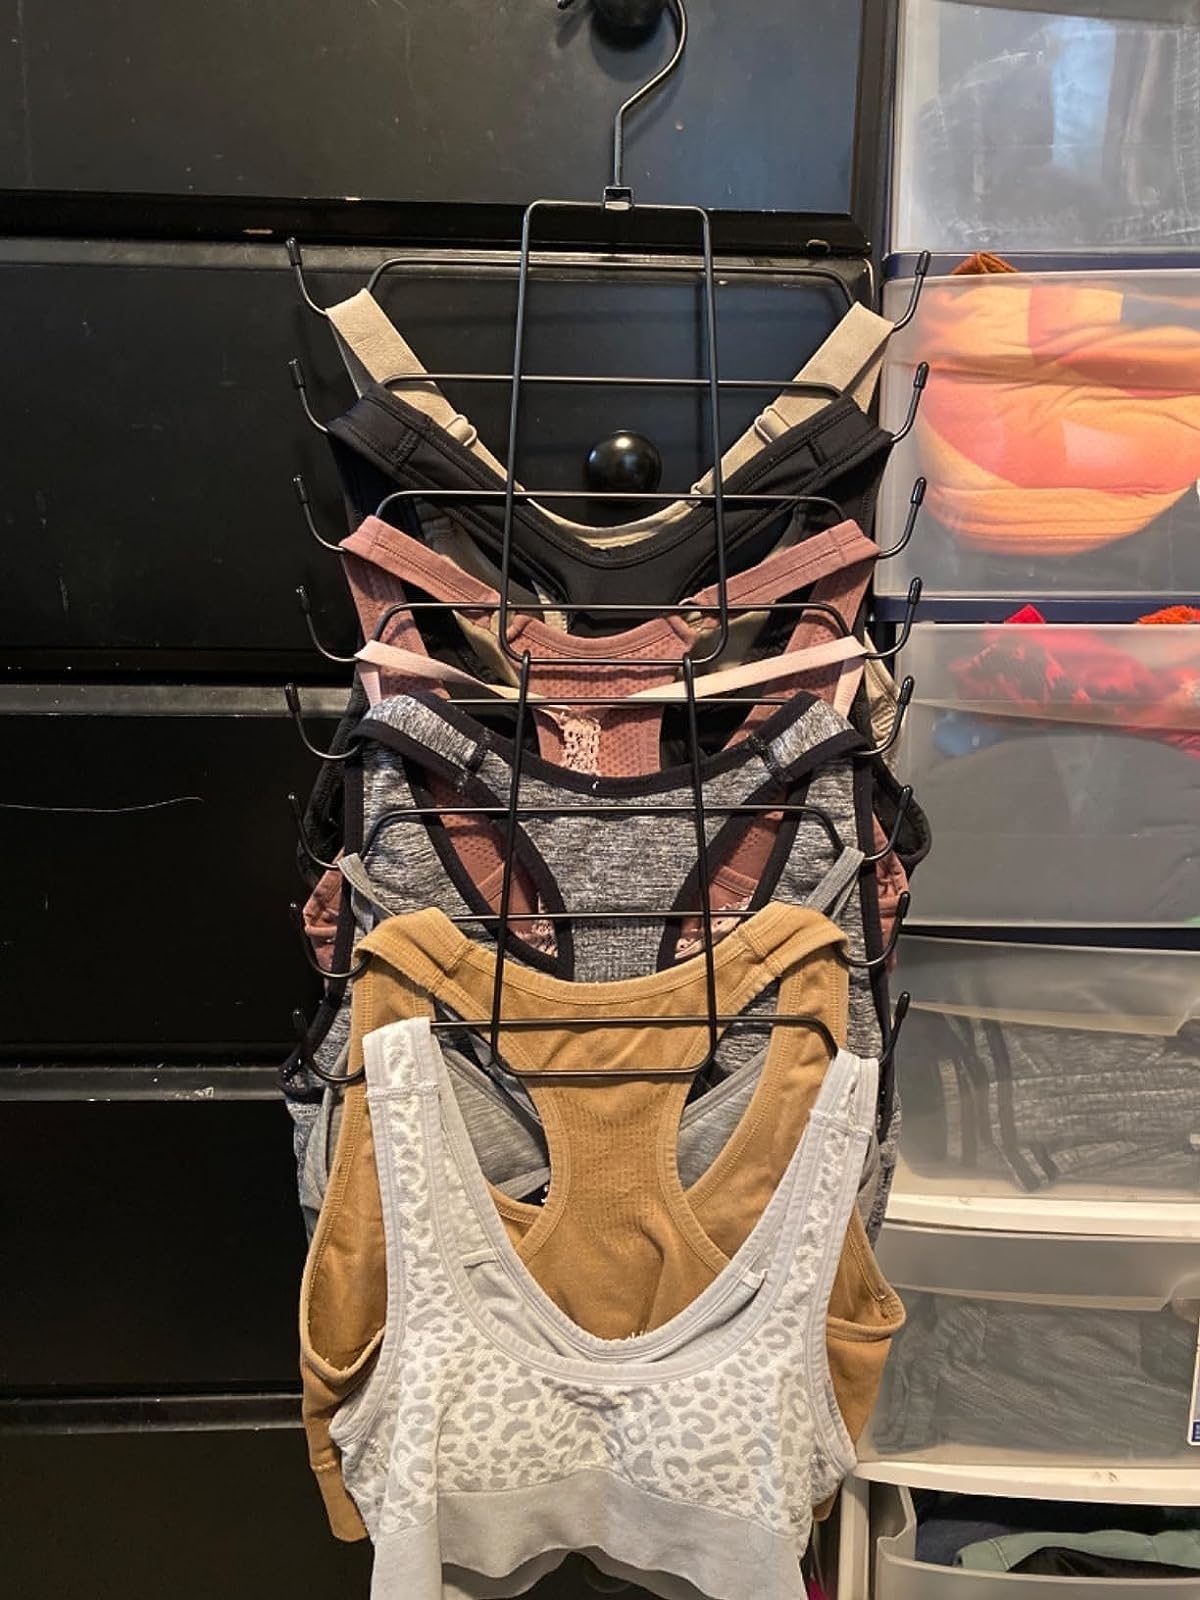 Reviewer image of sports bras hanging on organizer